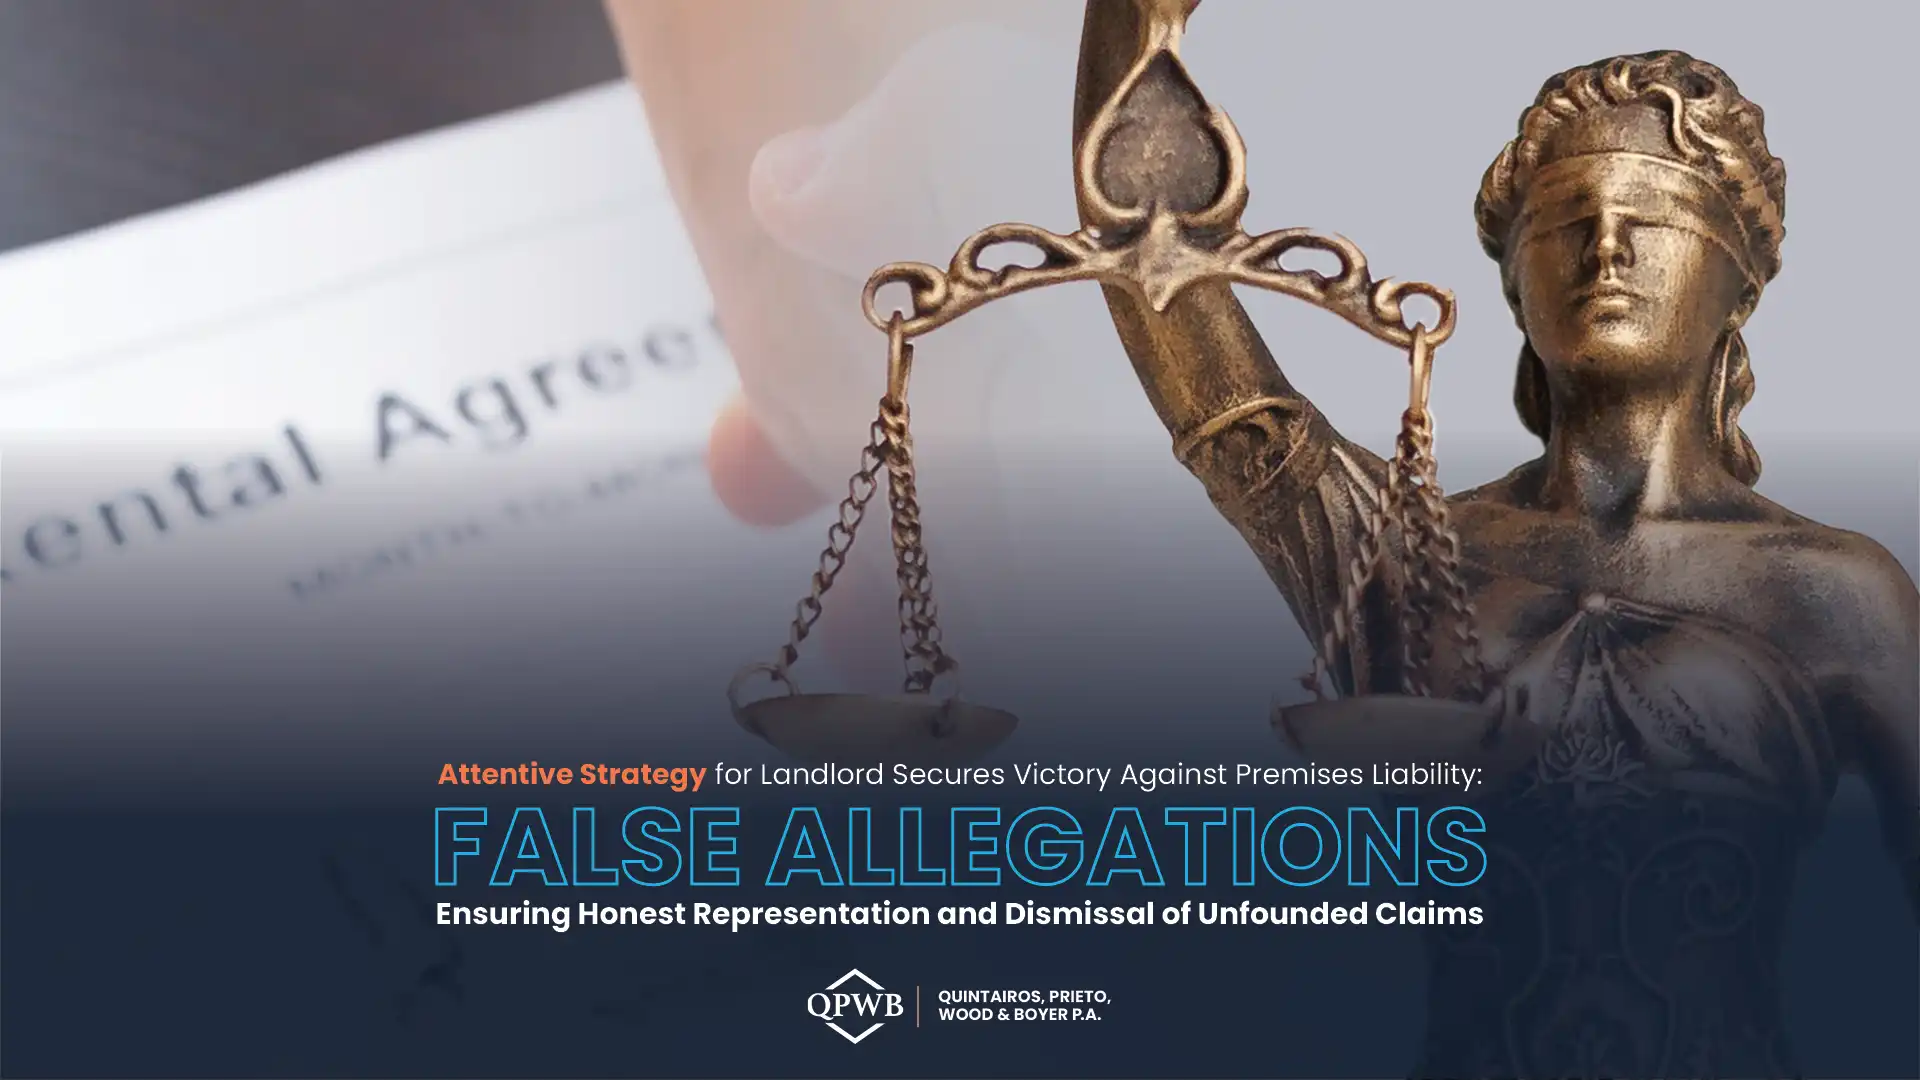 Attentive Strategy for Landlord Secures Victory Against Premise Liability: False Allegations Ensuring Honest Representation and Dismissal of Unfounded Claims